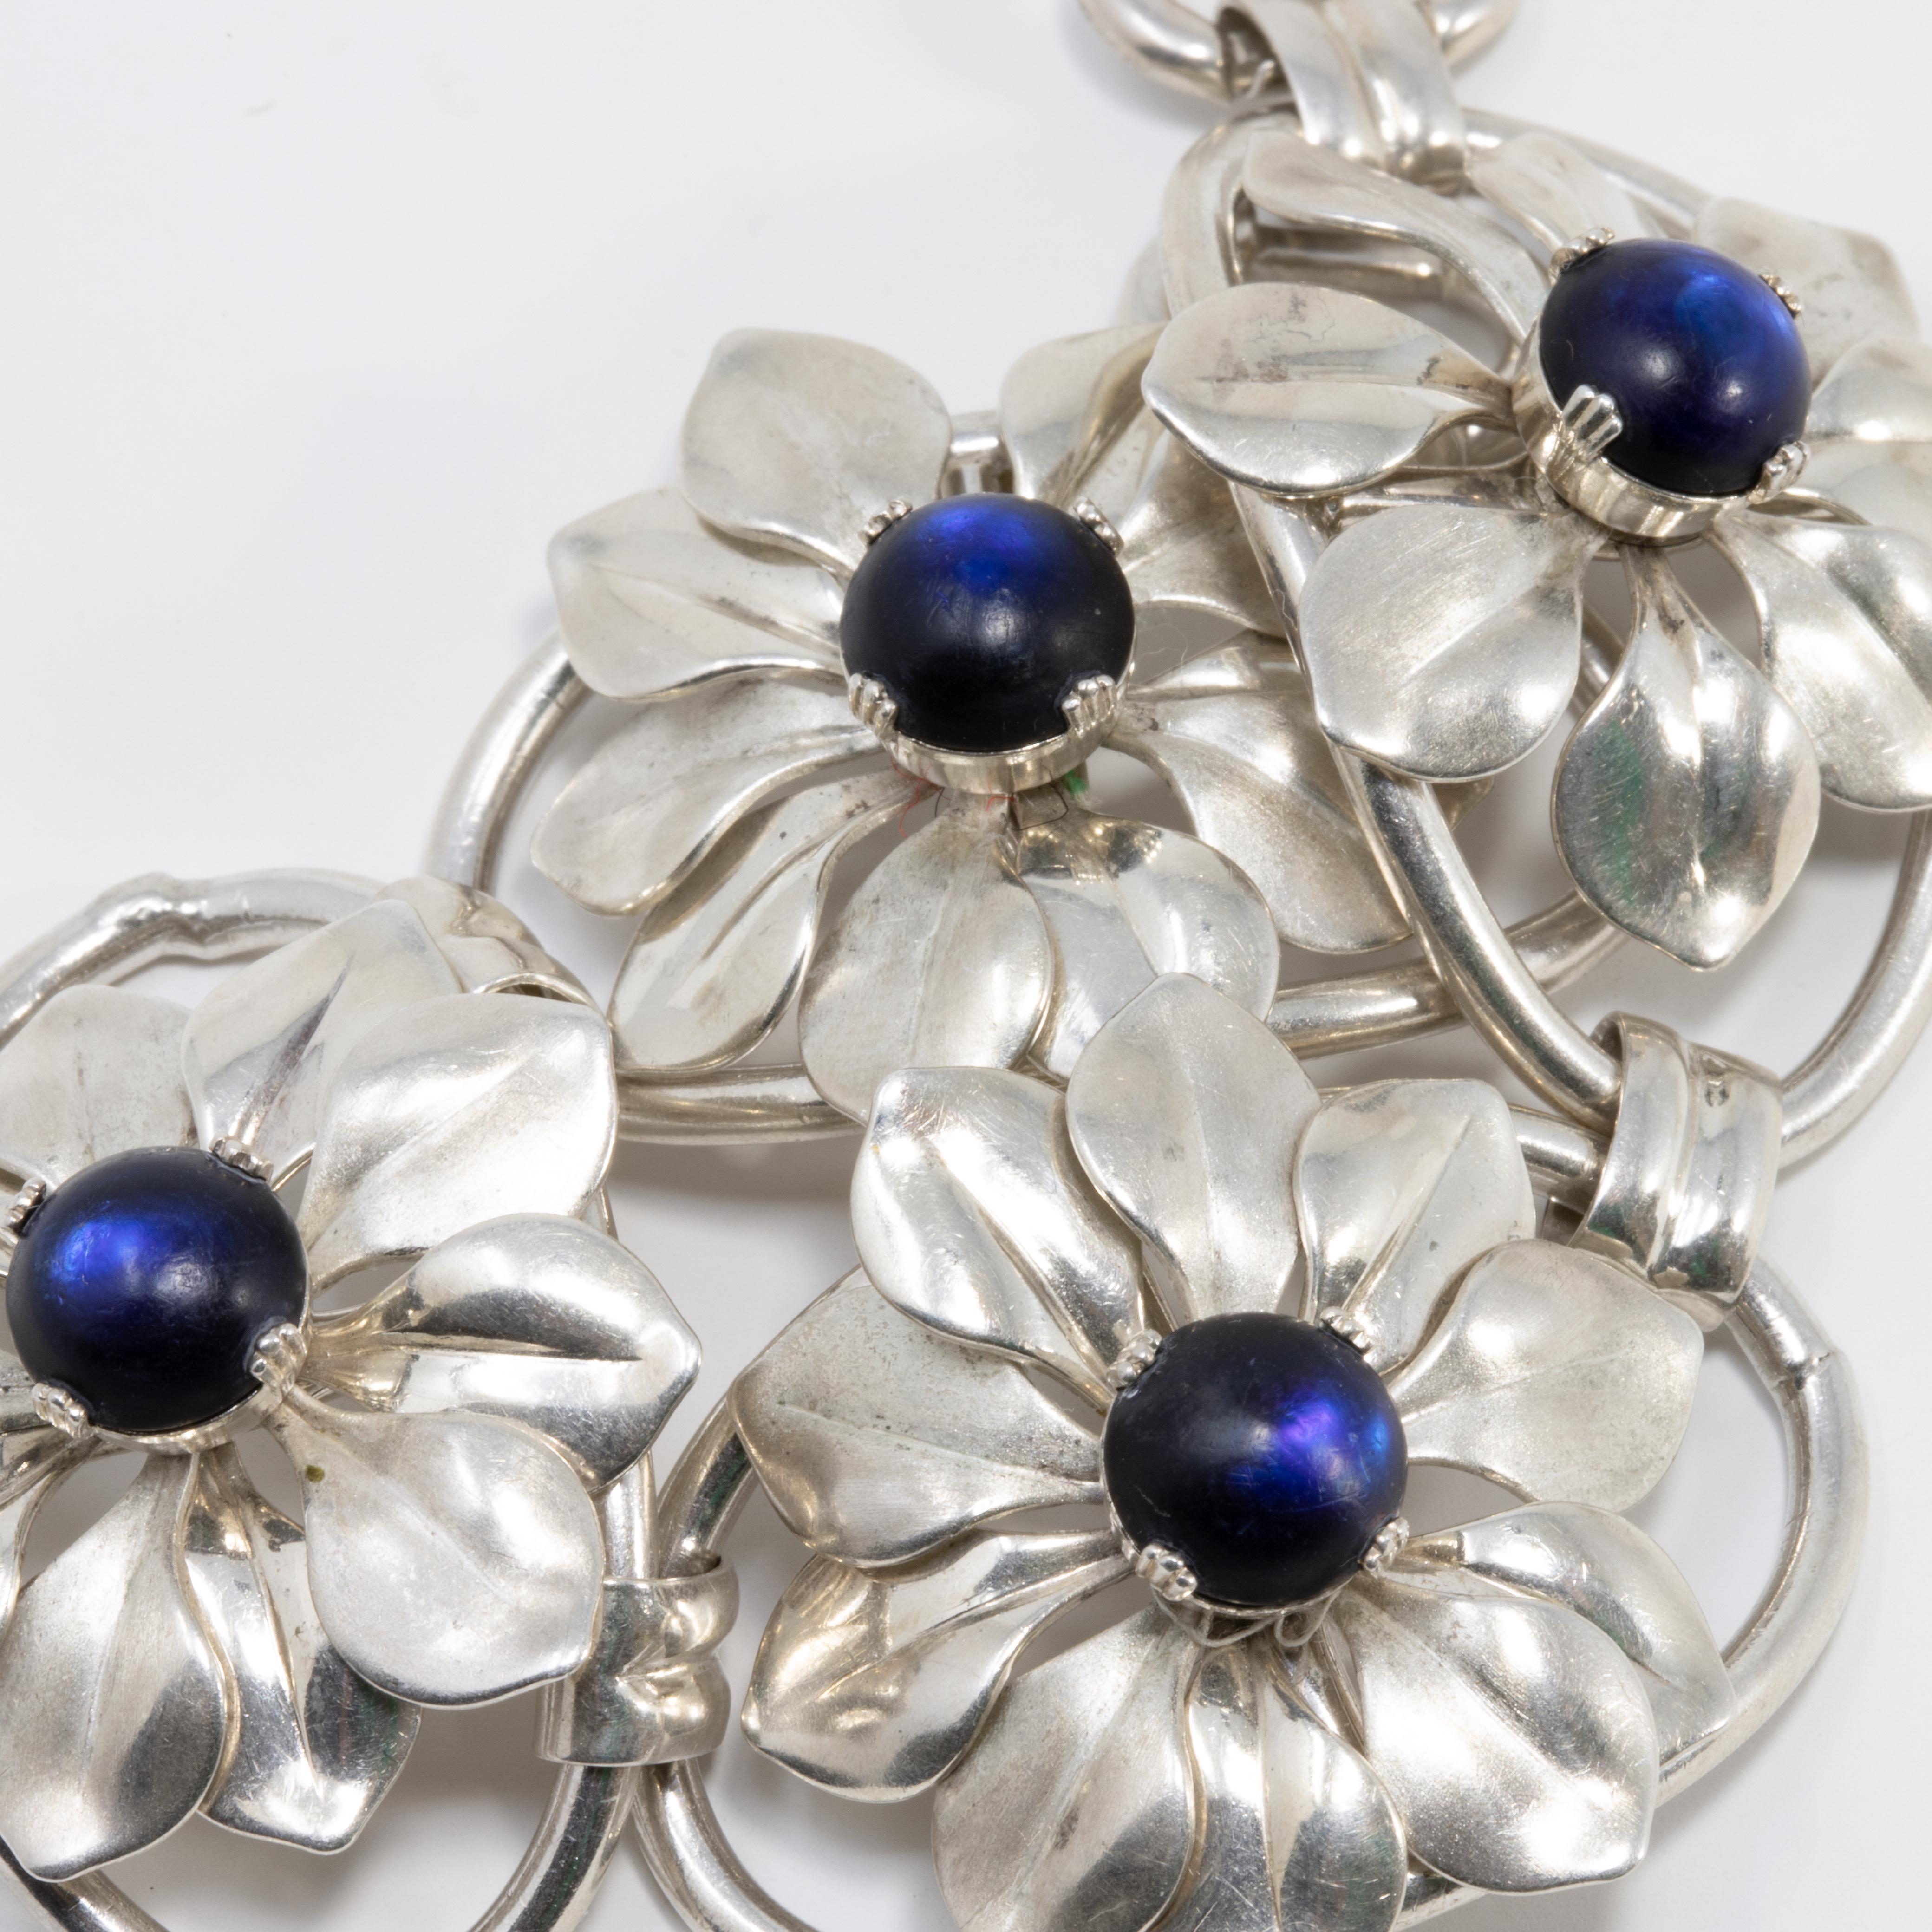 A stylish vintage bracelet. This pretty accessory features four flower links, each with a single dark blue/indigo gemstone. Fastened with a foldover clasp.

Hallmarked: Kreisler Sterling

